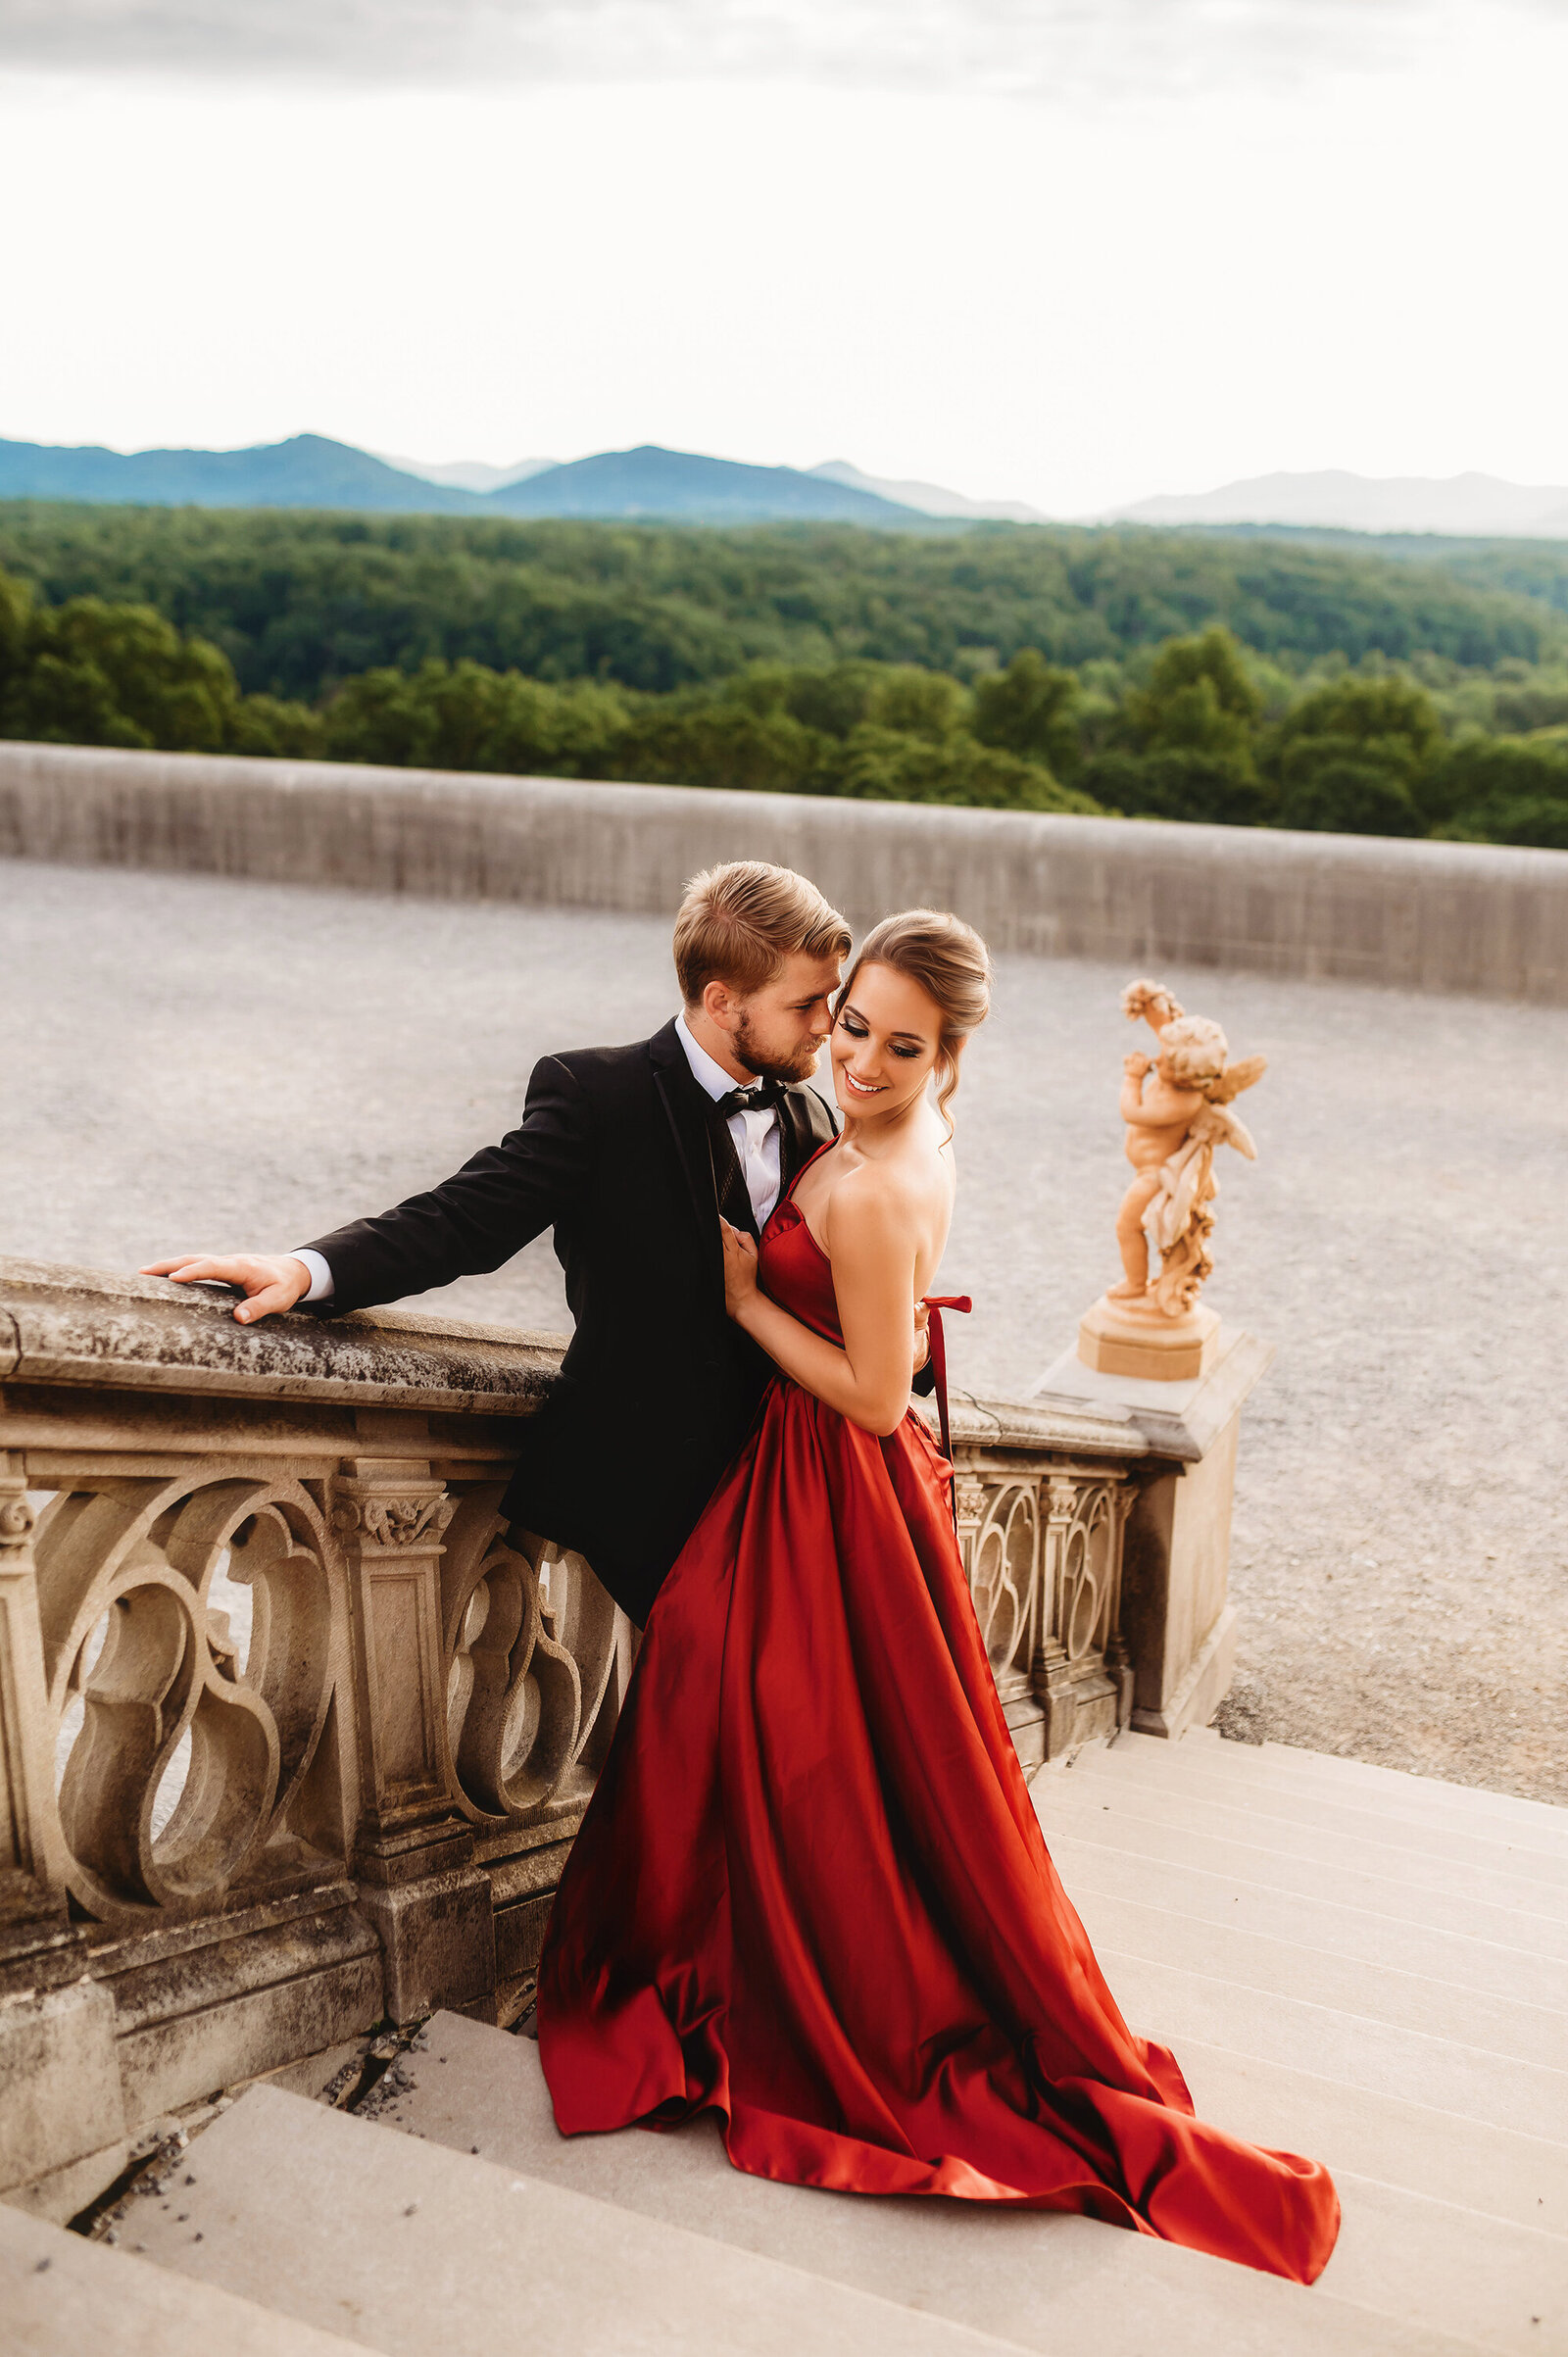 A couple poses for Engagement Photos at Biltmore Estate in Asheville, NC.